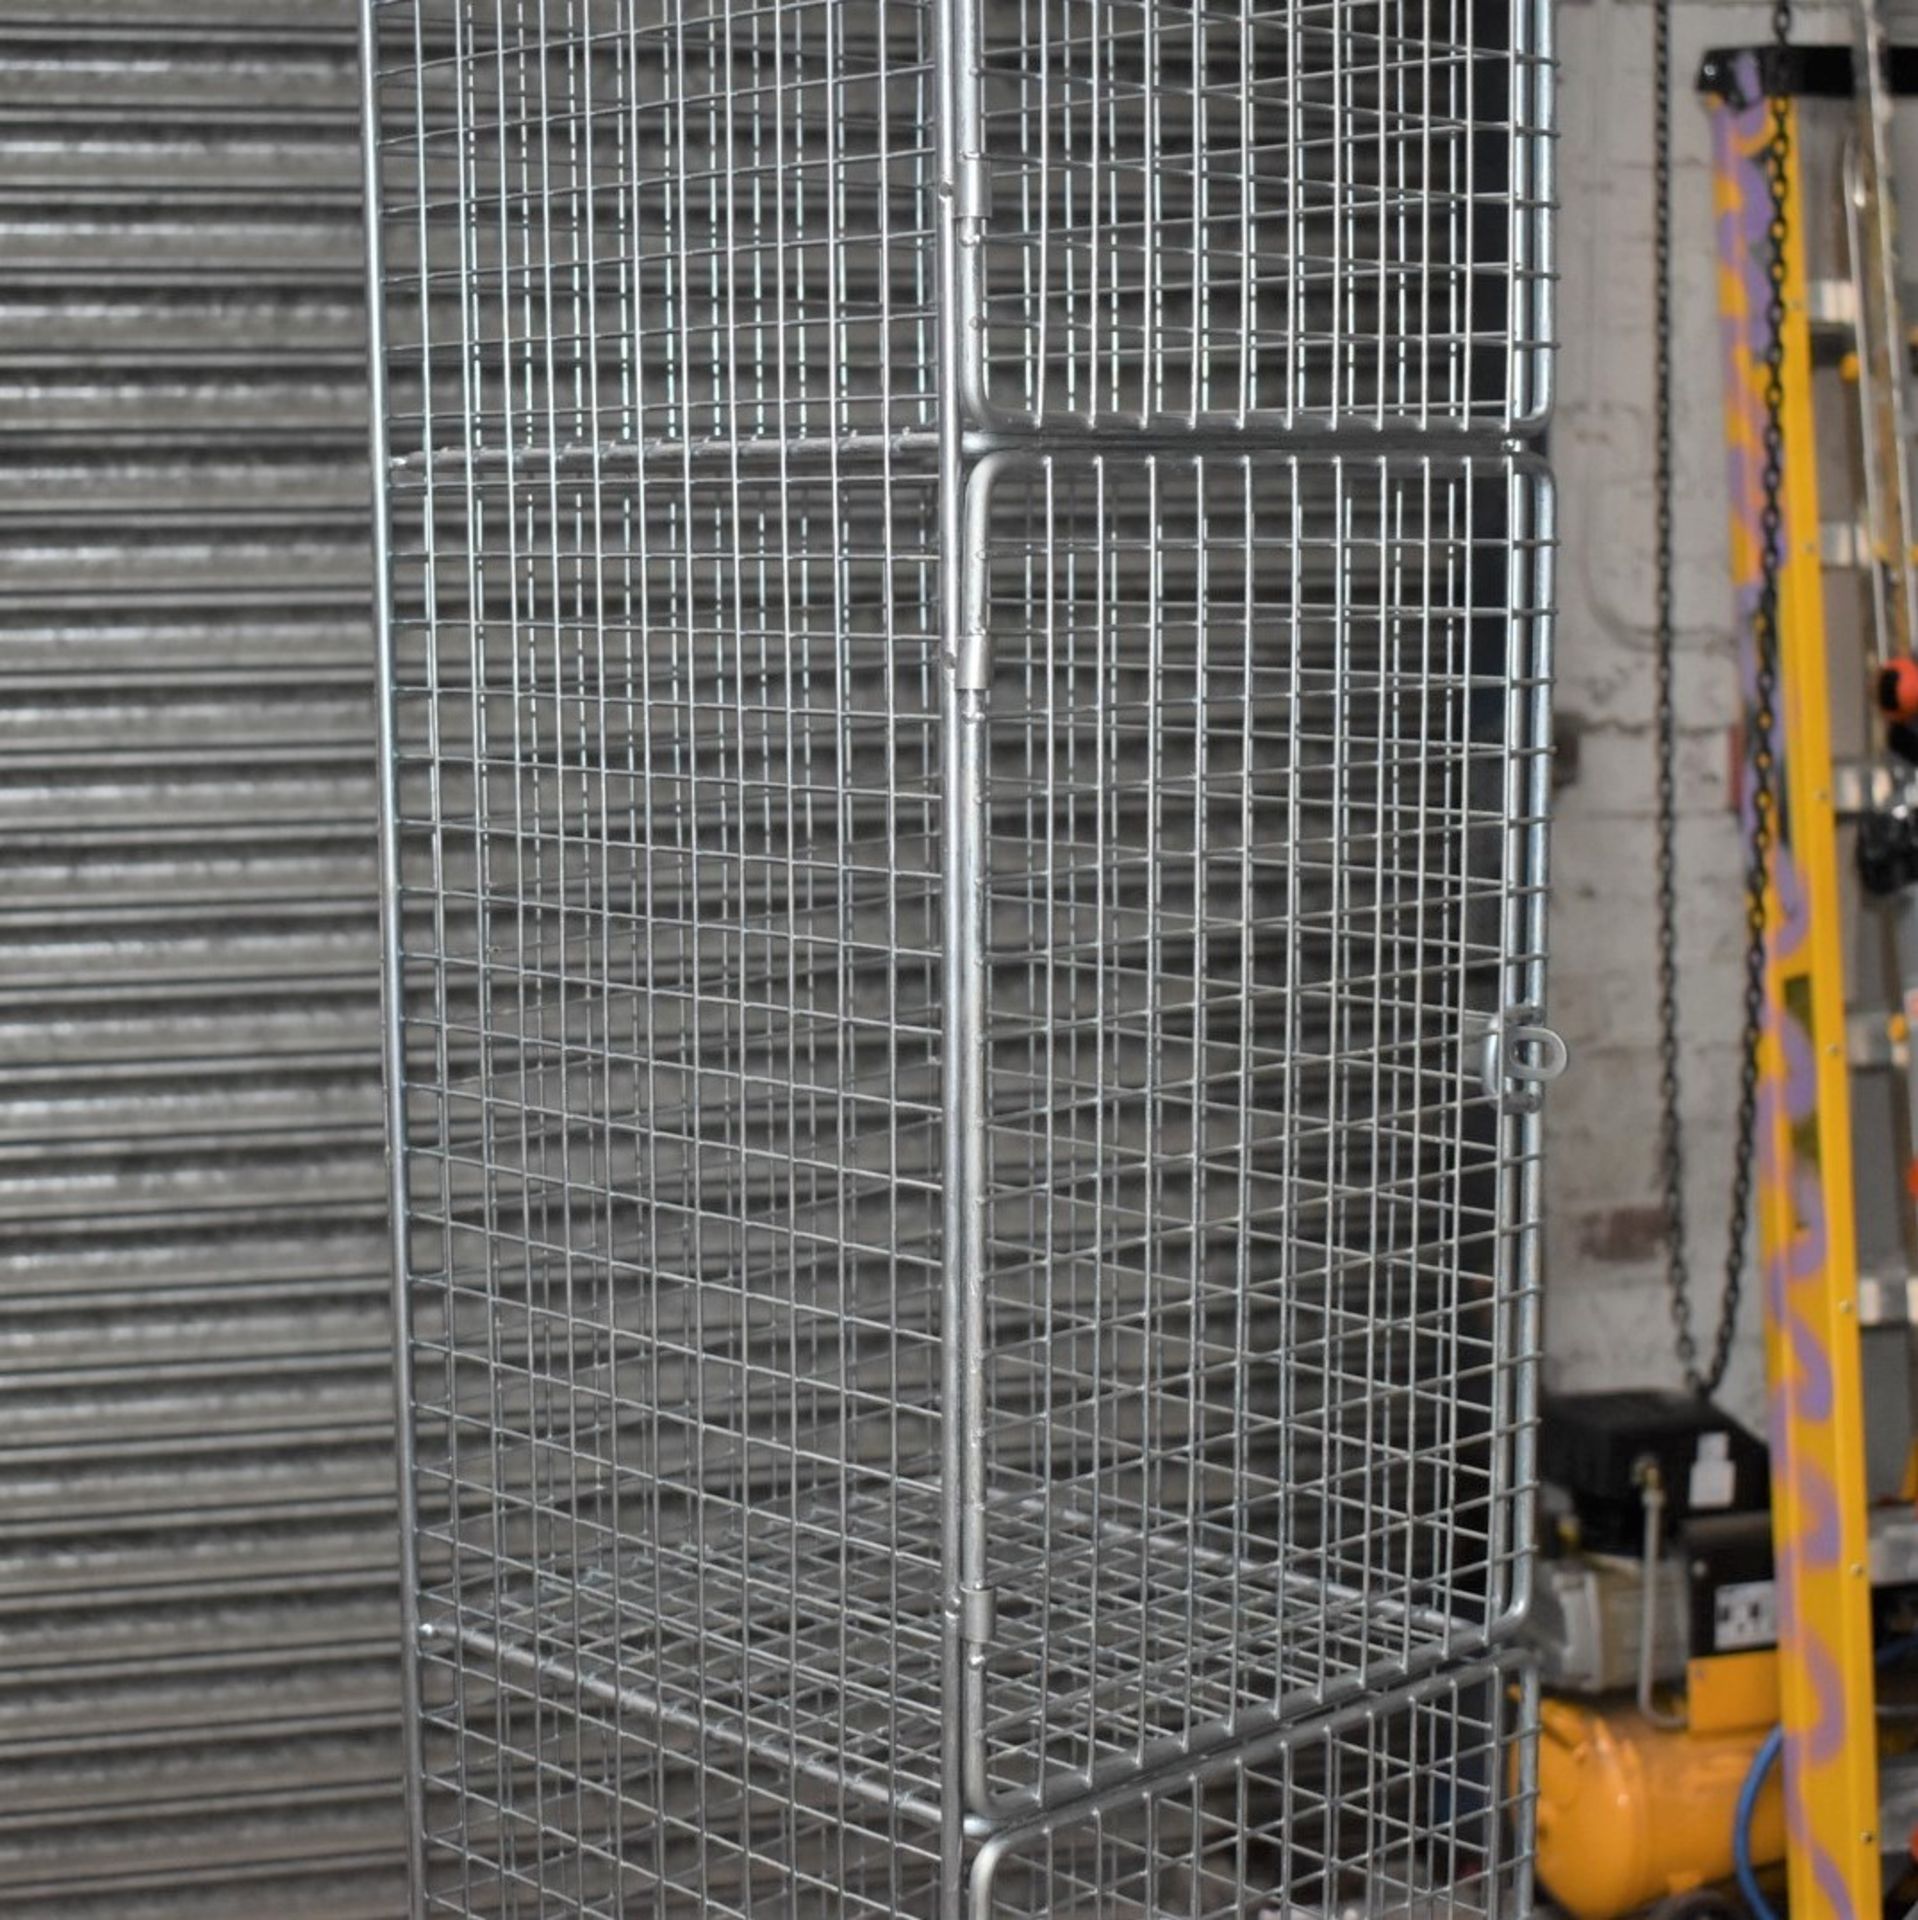 1 x Wire Mesh Cage Lockers With Four Locker Compartments - Dimensions: H193 x W30 x D32 cms - Ref: - Image 11 of 11